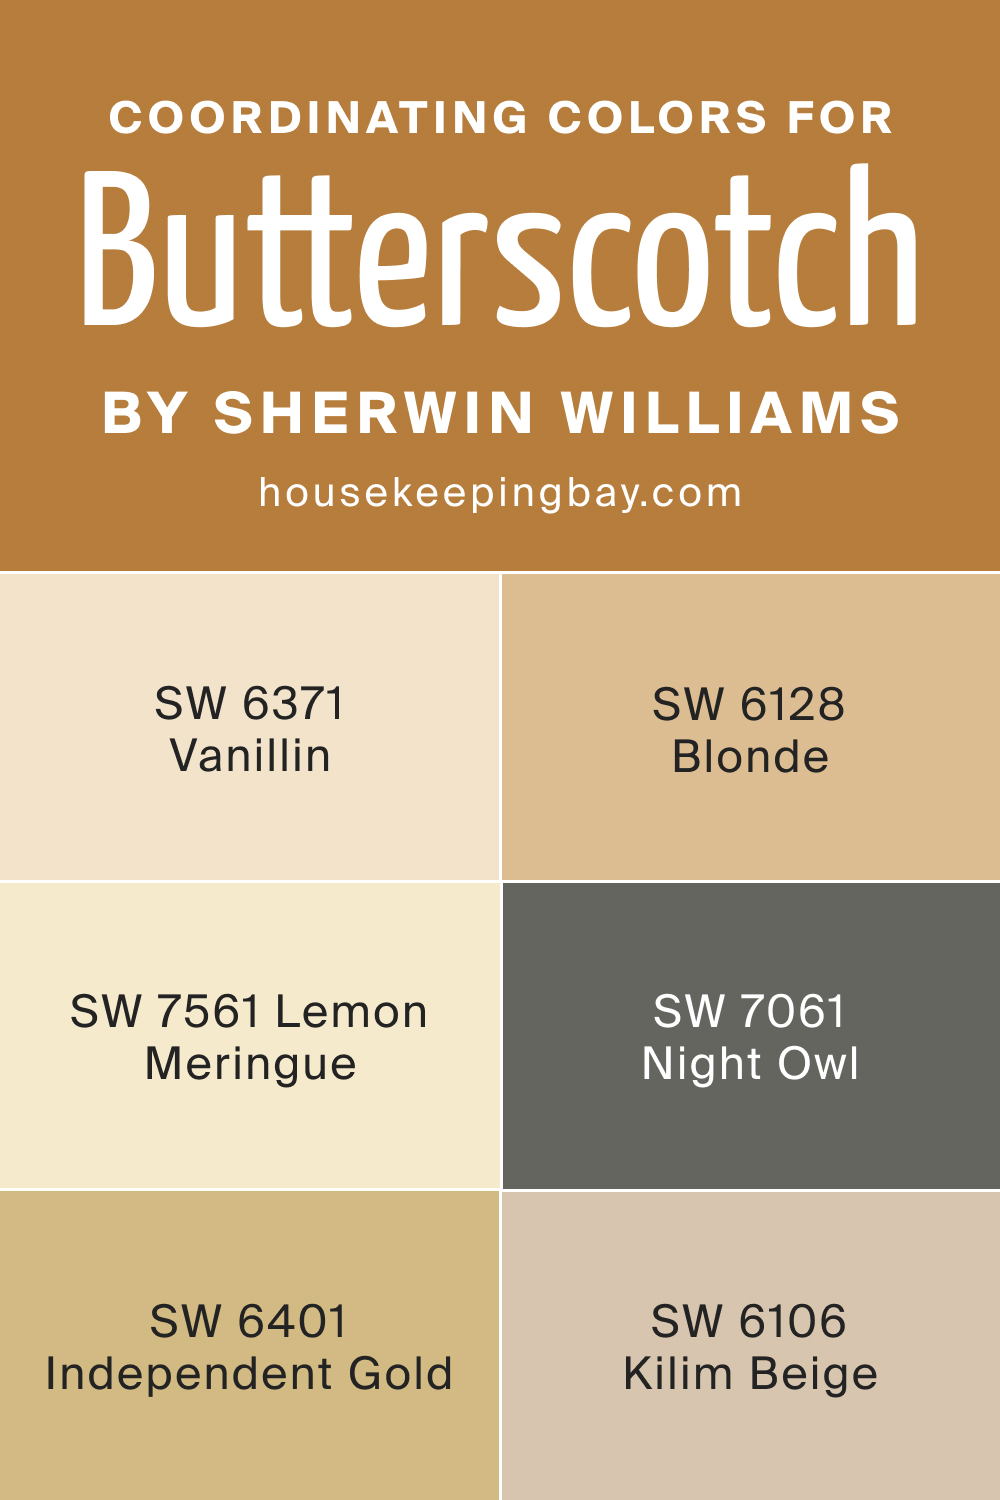 Coordinating Colors for SW 6377 Butterscotch by Sherwin Williams